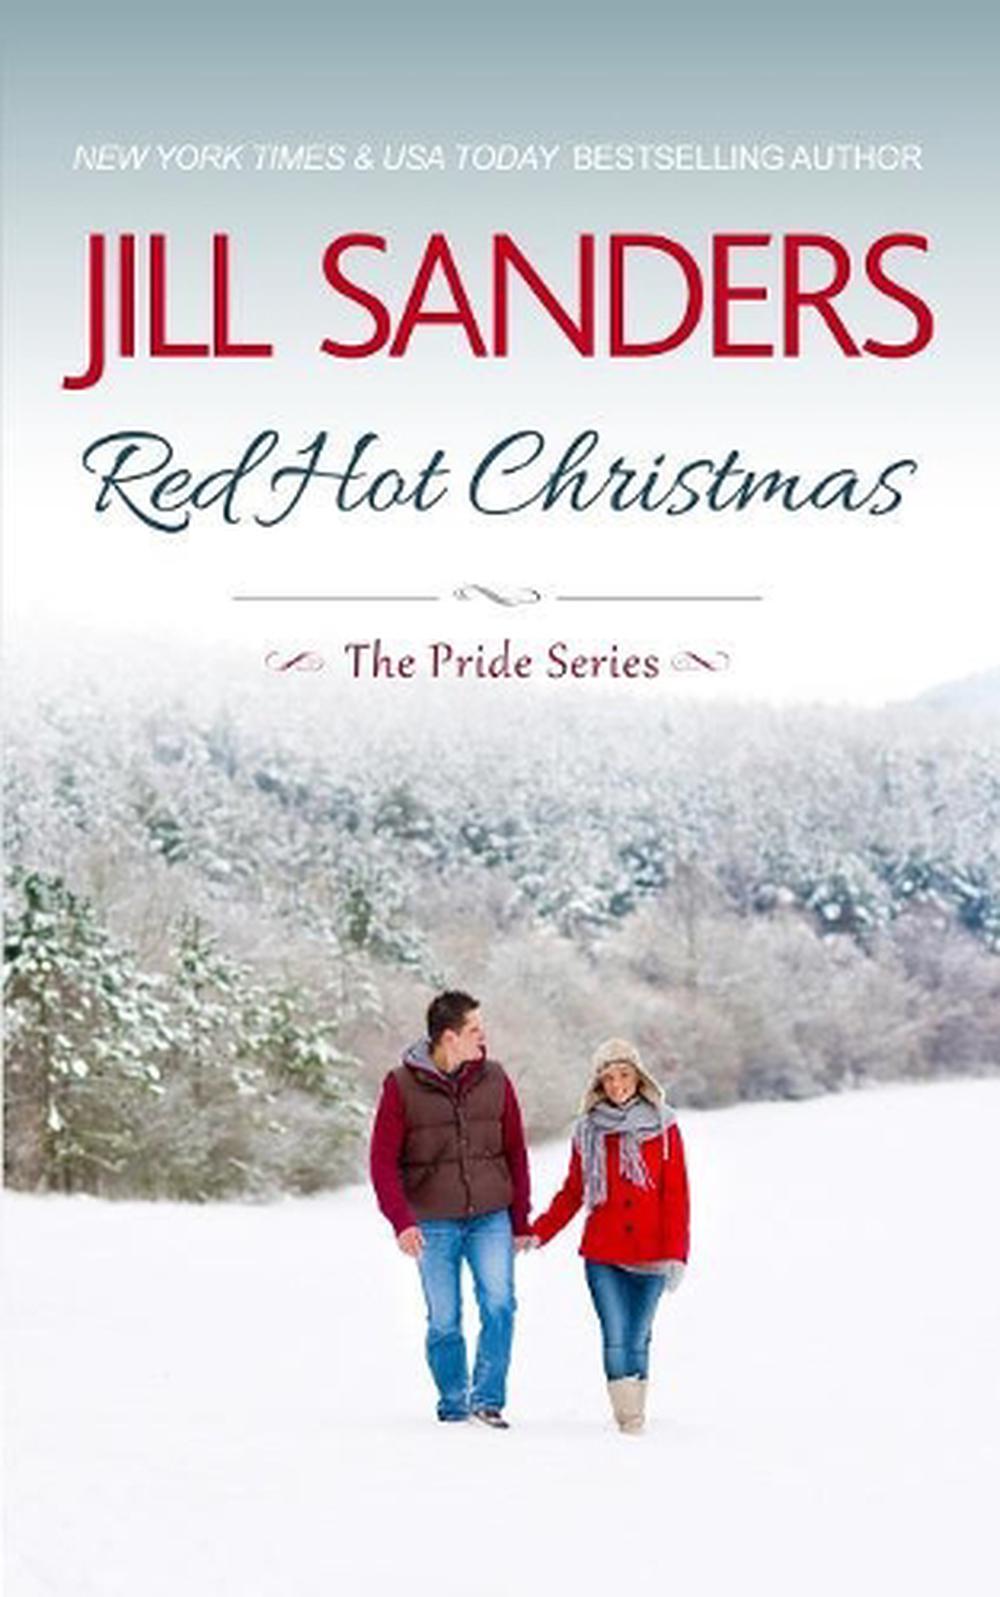 Red Hot Christmas by Jill Sanders (English) Paperback Book Free ...